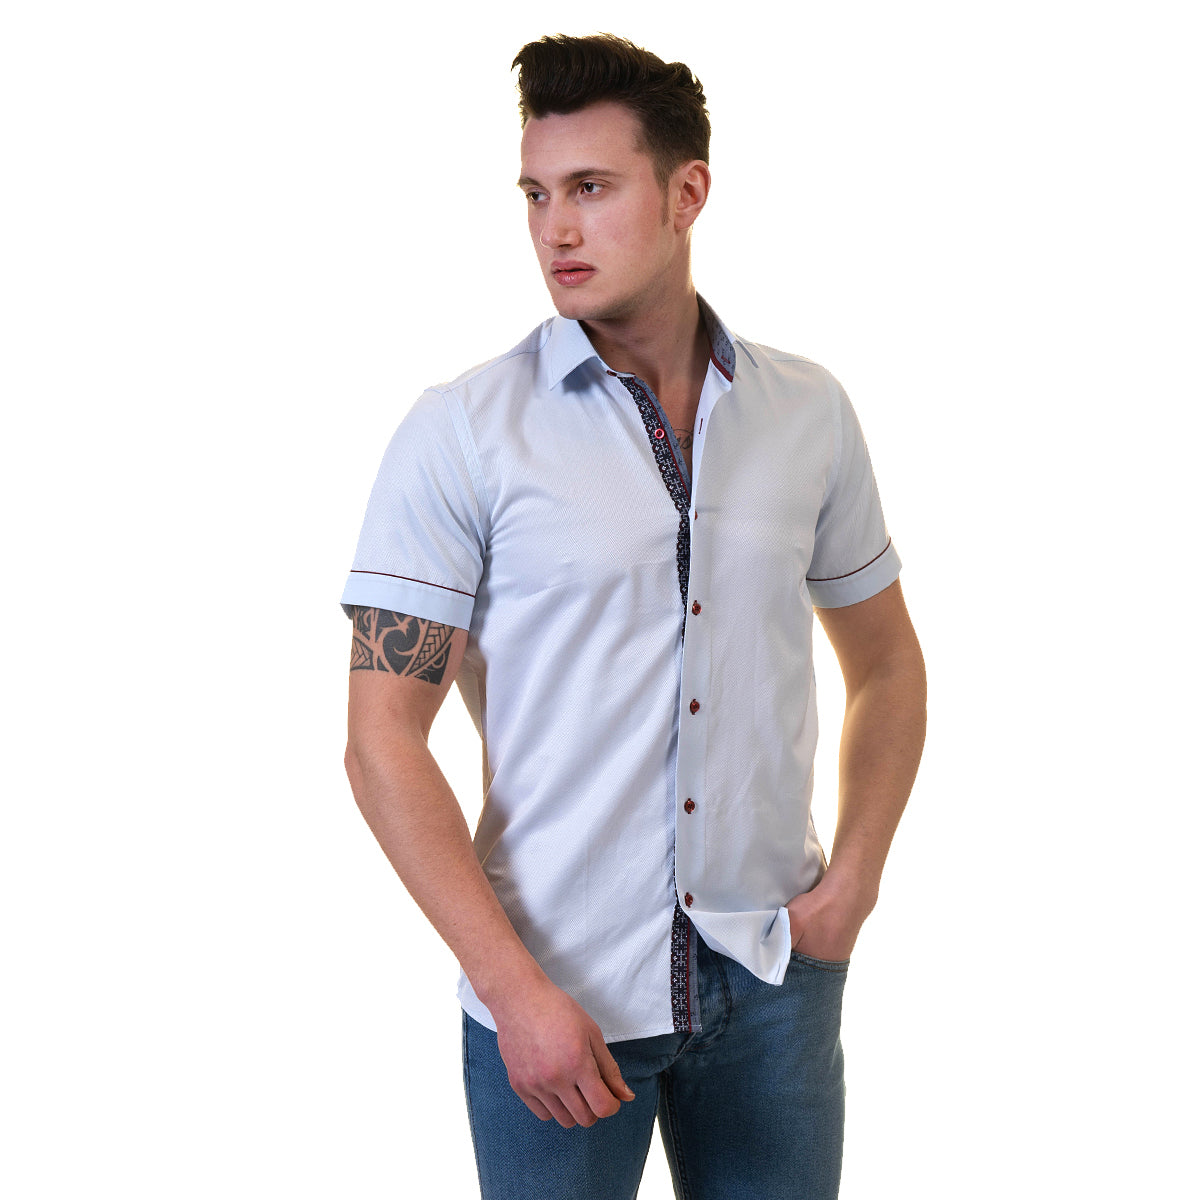 Blue Mens Short Sleeve Button up Shirts - Tailored Slim Fit Cotton Dress Shirts